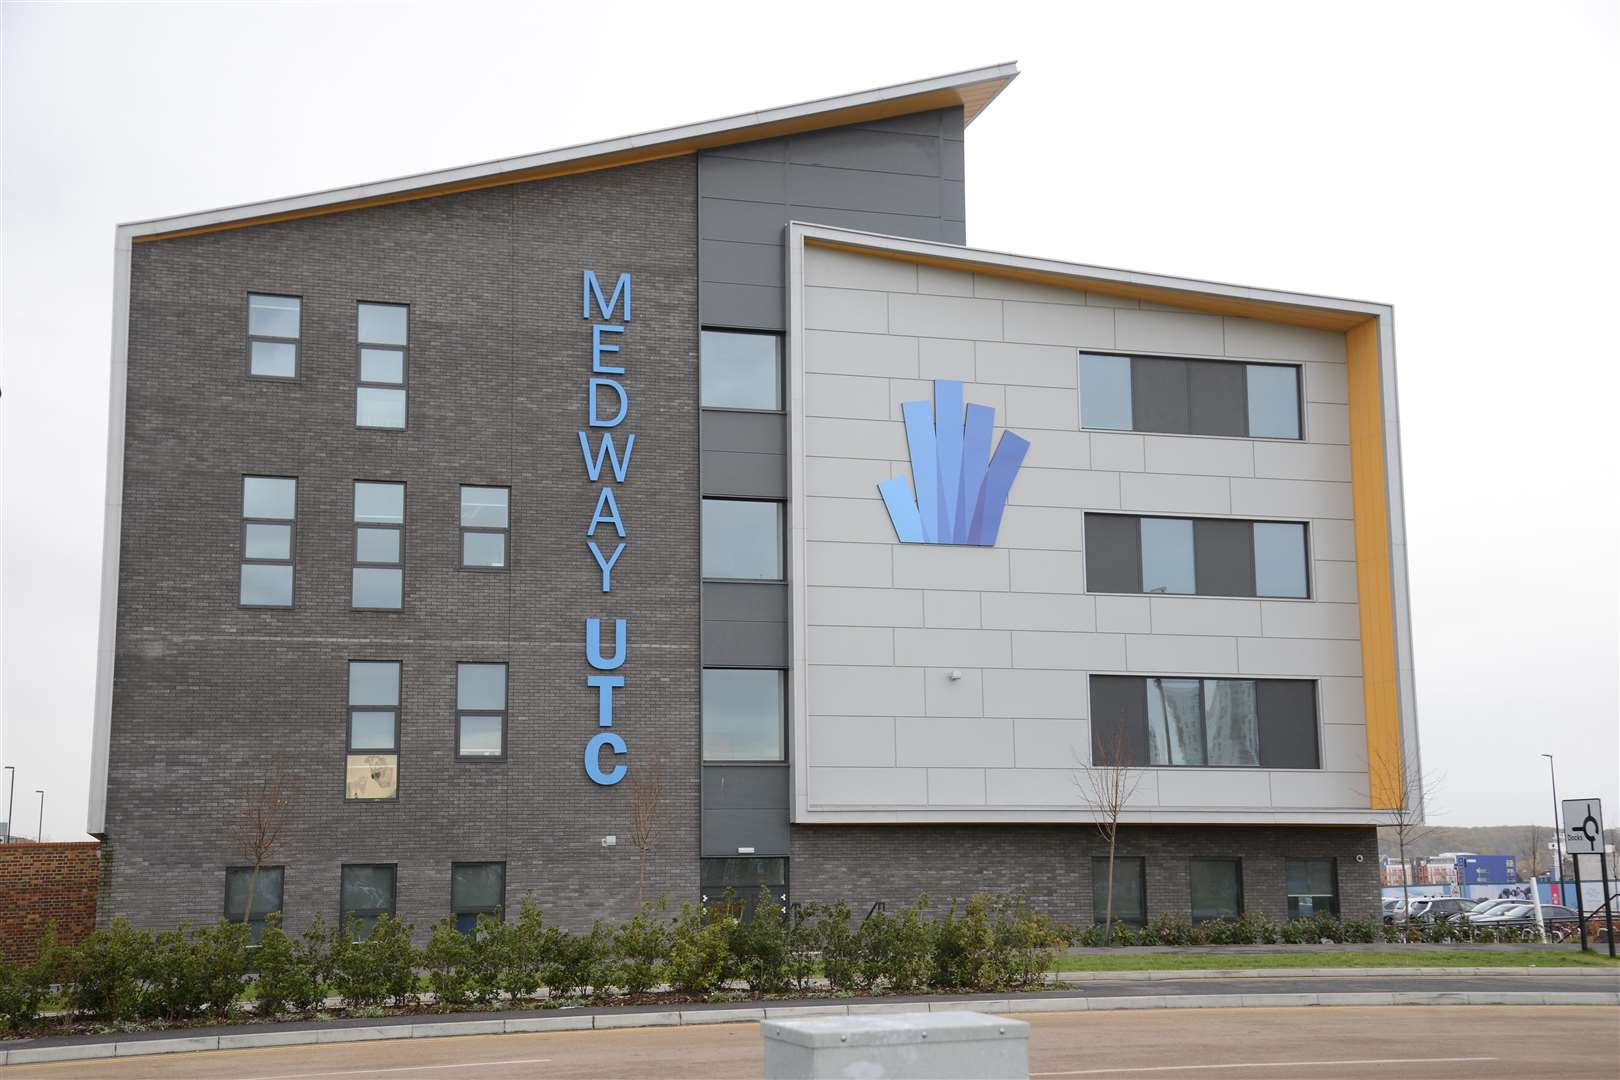 Medway UTC buildingMystery PicturesPicture: Gary Browne FM4584426 (3576877)